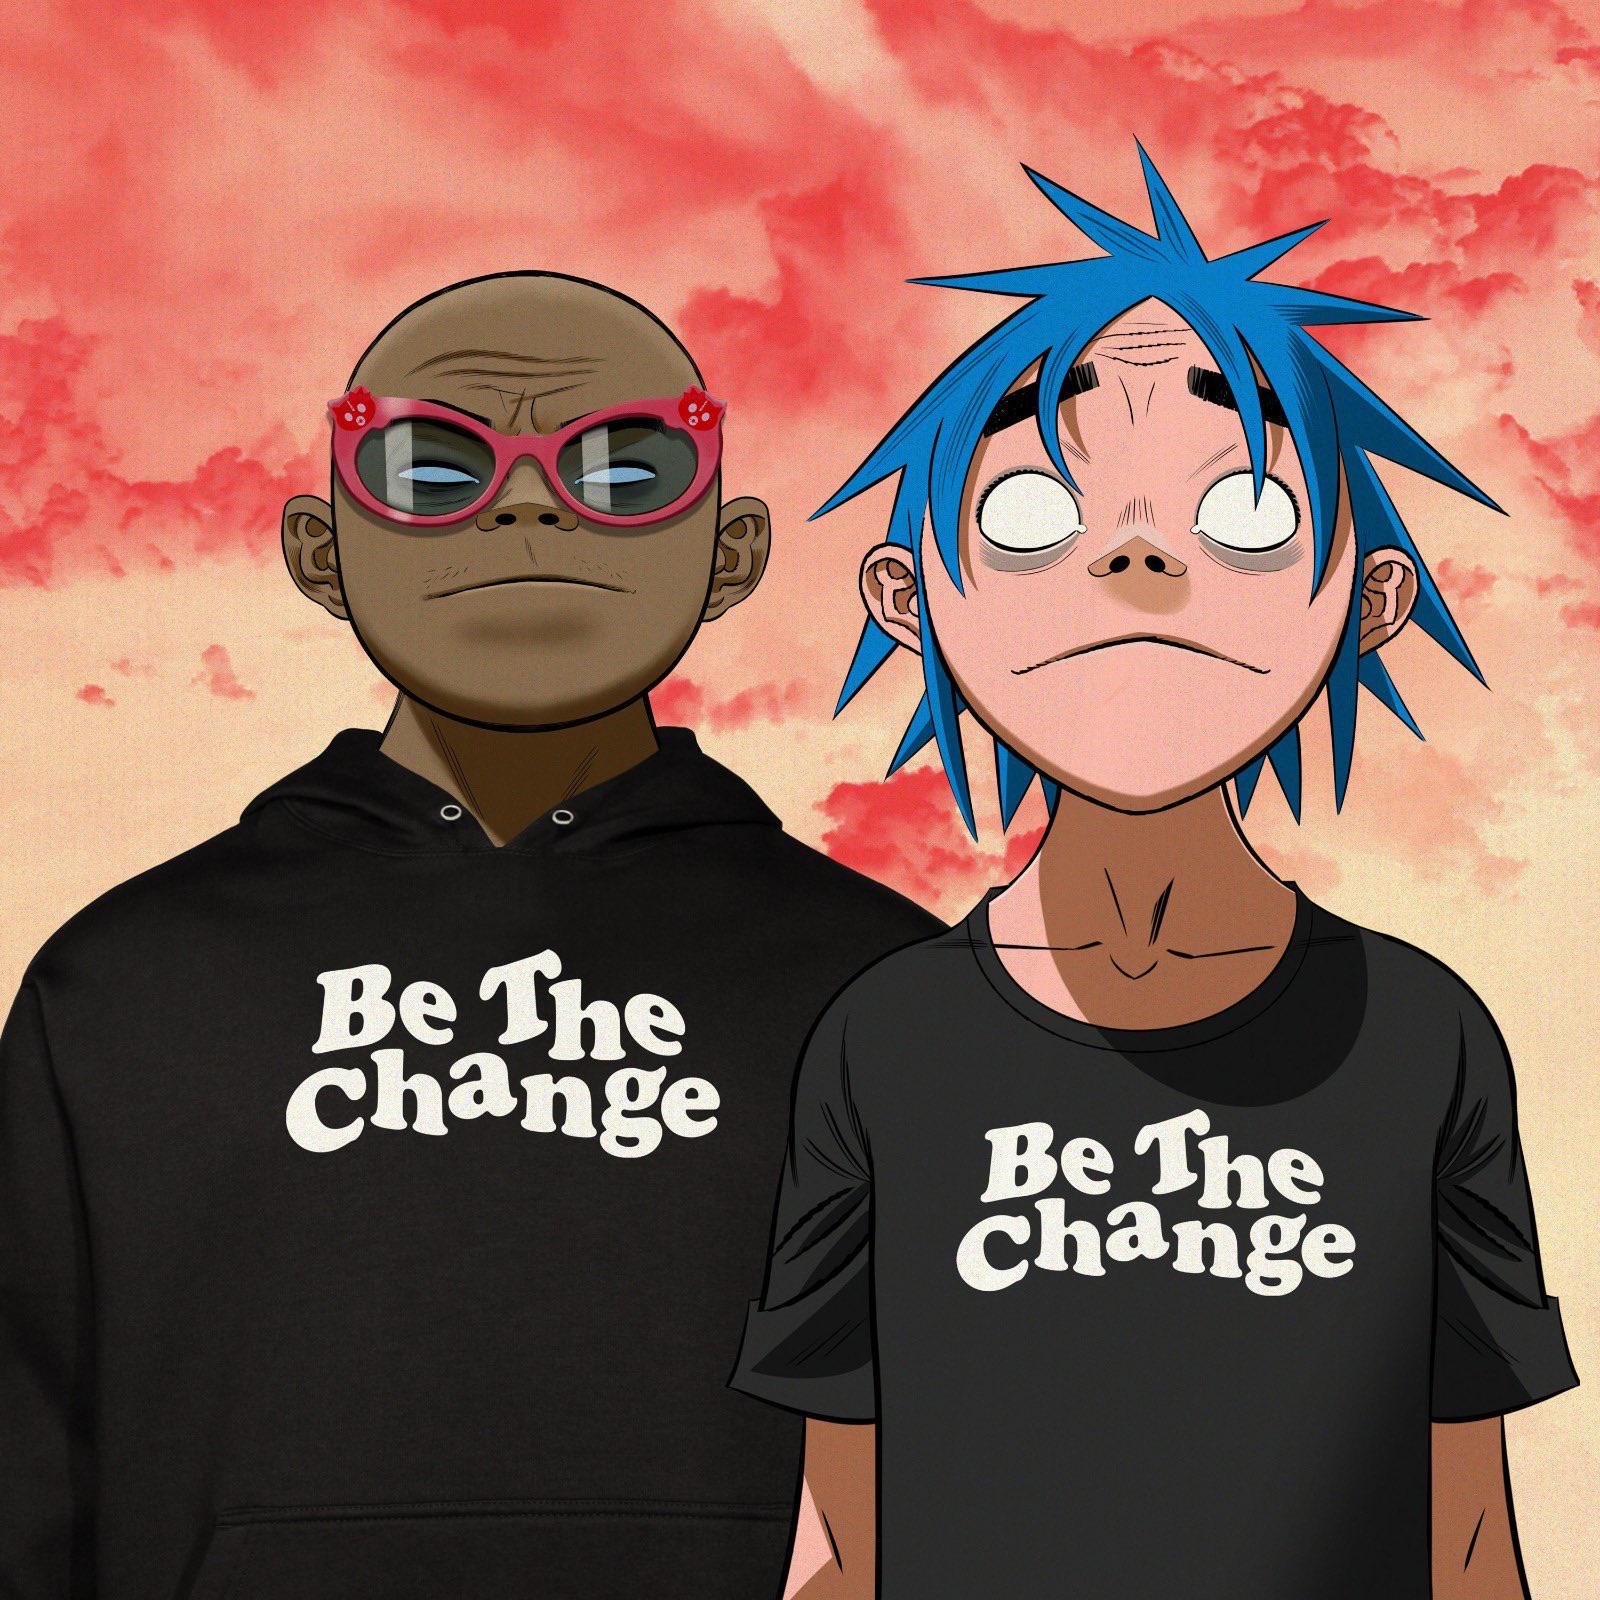 Join the Gorillaz and Robert Smith for a Social Justice Adventure on “Strange Timez”